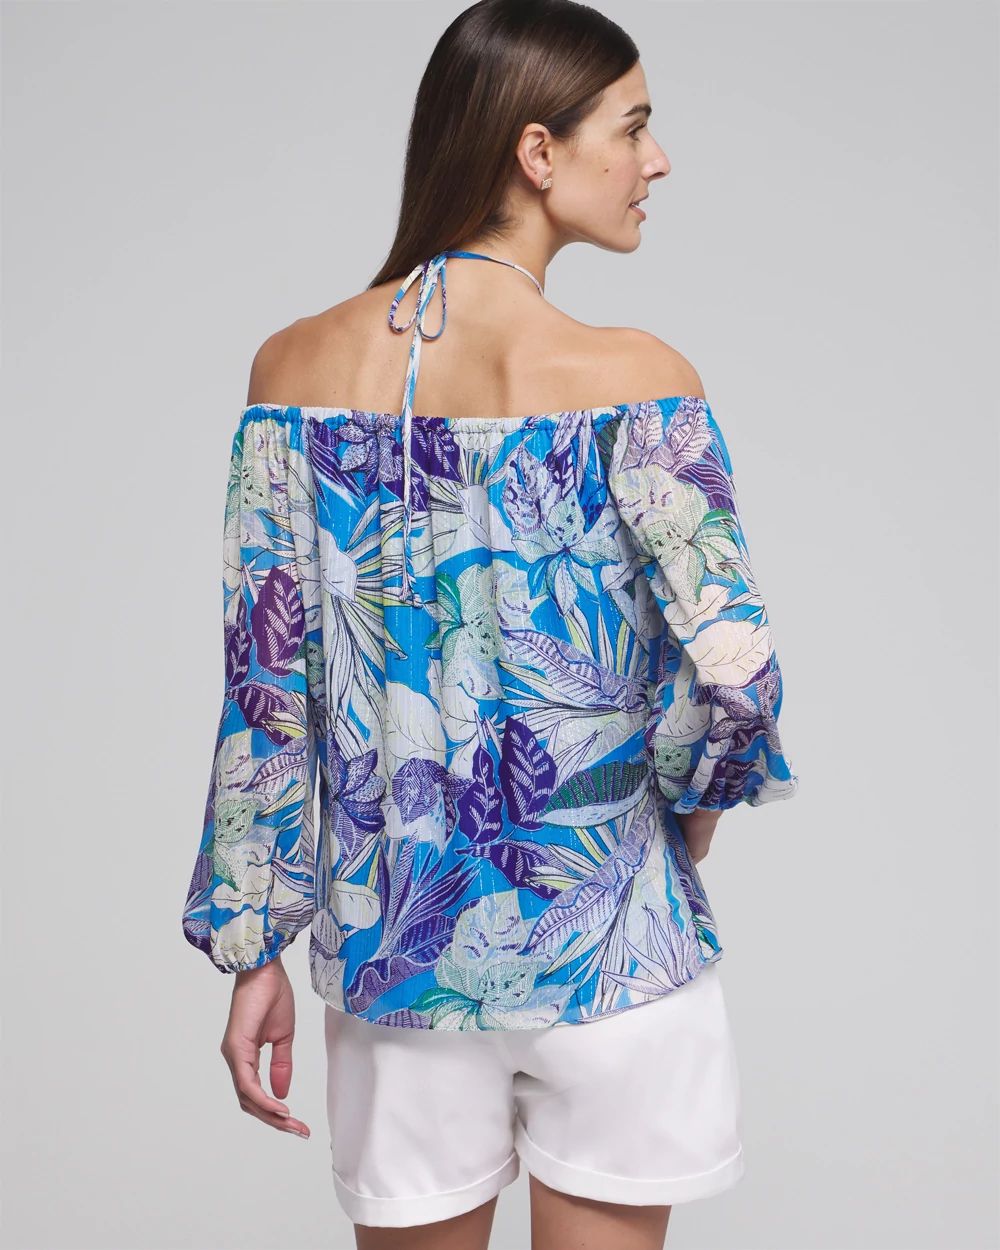 Outlet WHBM Tie-Neck Off-The-Shoulder Blouse click to view larger image.